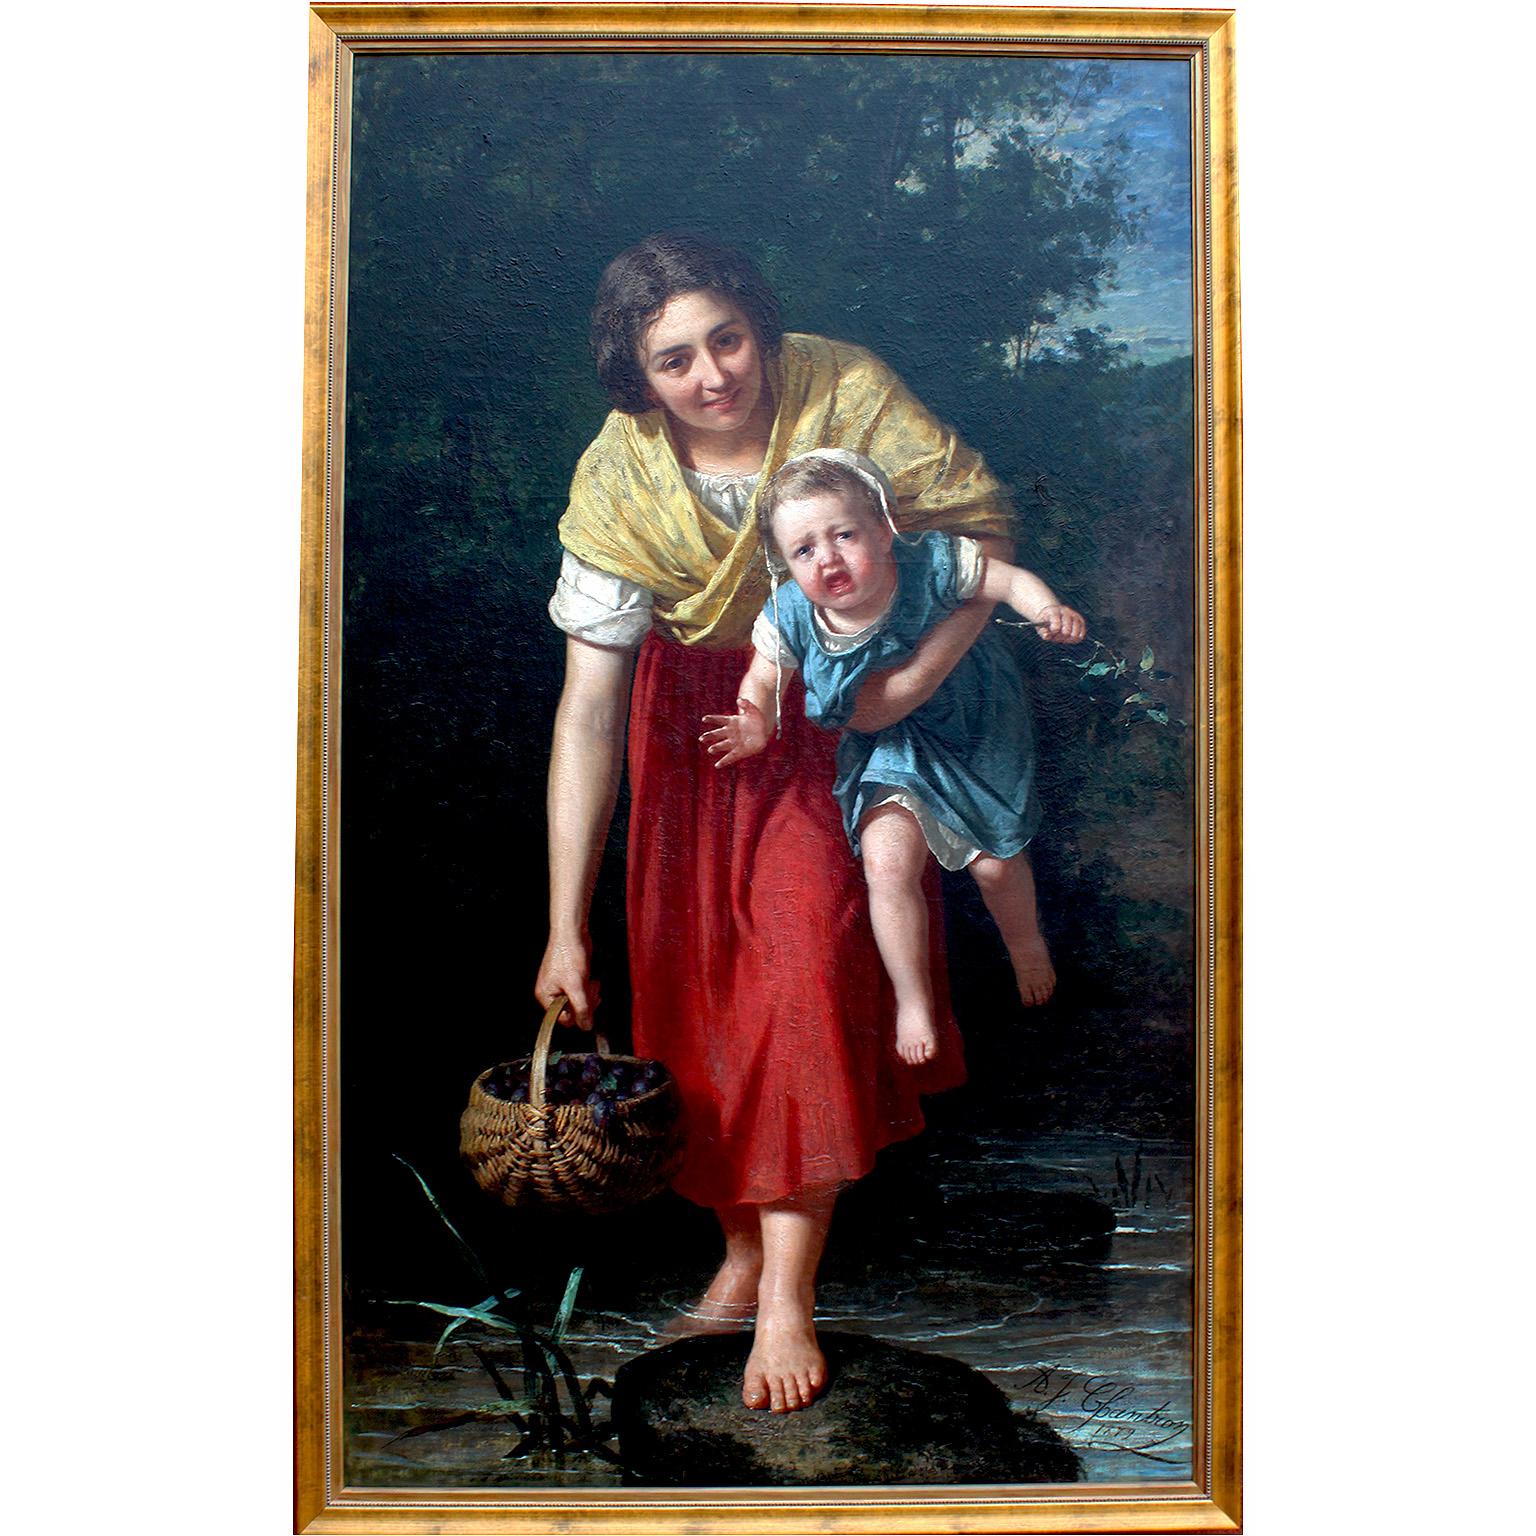 Jacques Chantron 'French 1842-1918' 19th Century Oil on Canvas "Mother & Child"